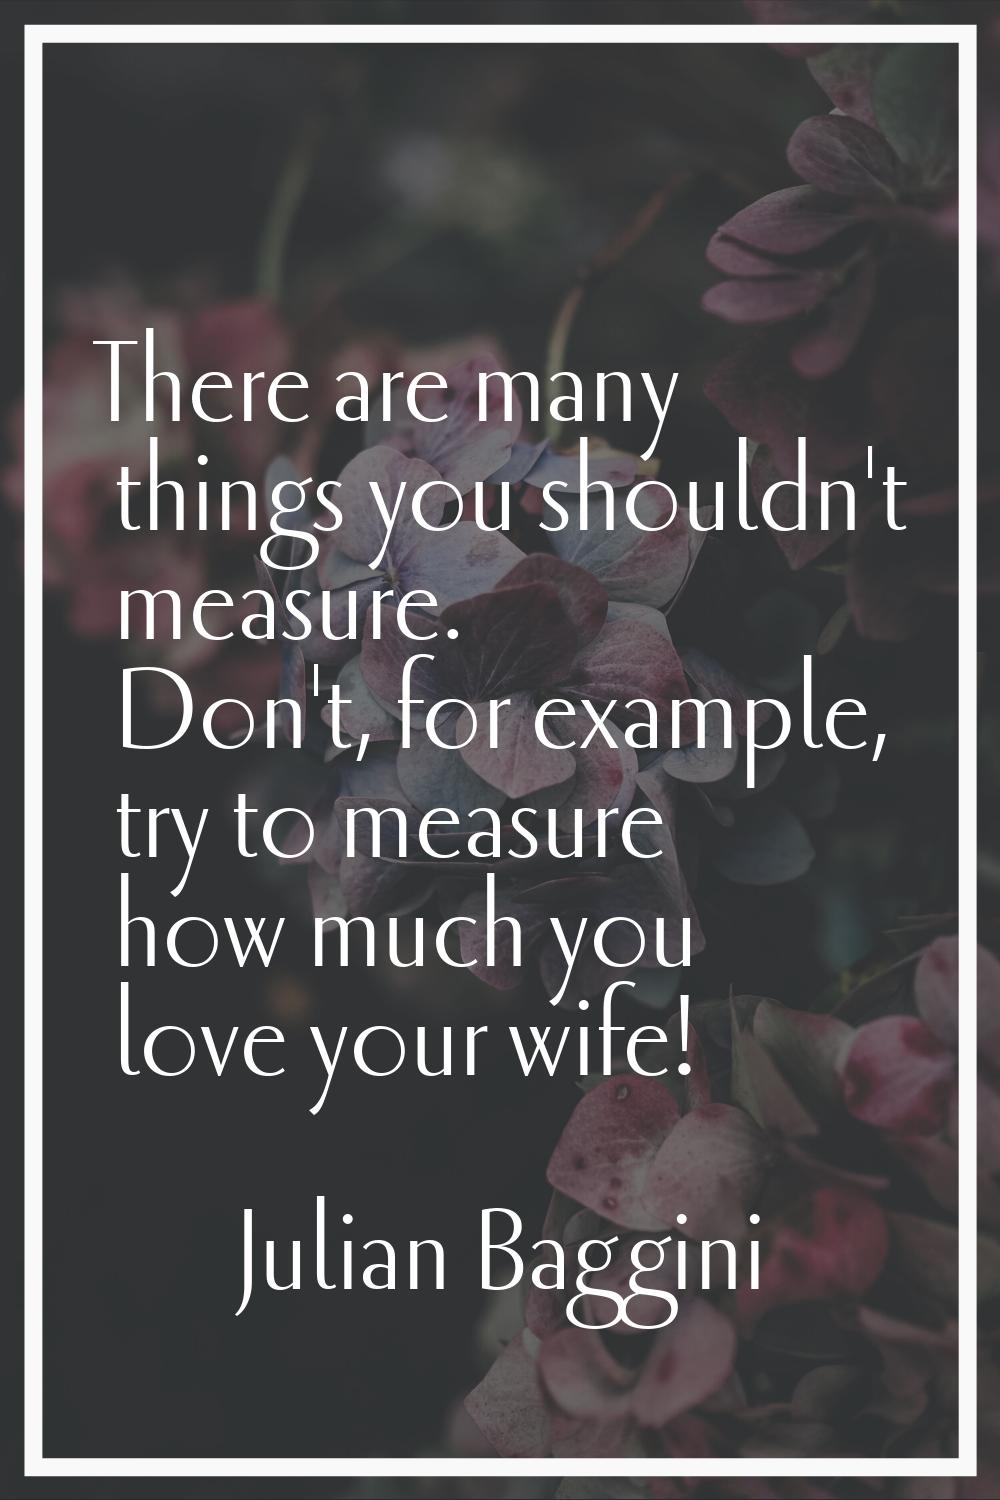 There are many things you shouldn't measure. Don't, for example, try to measure how much you love y